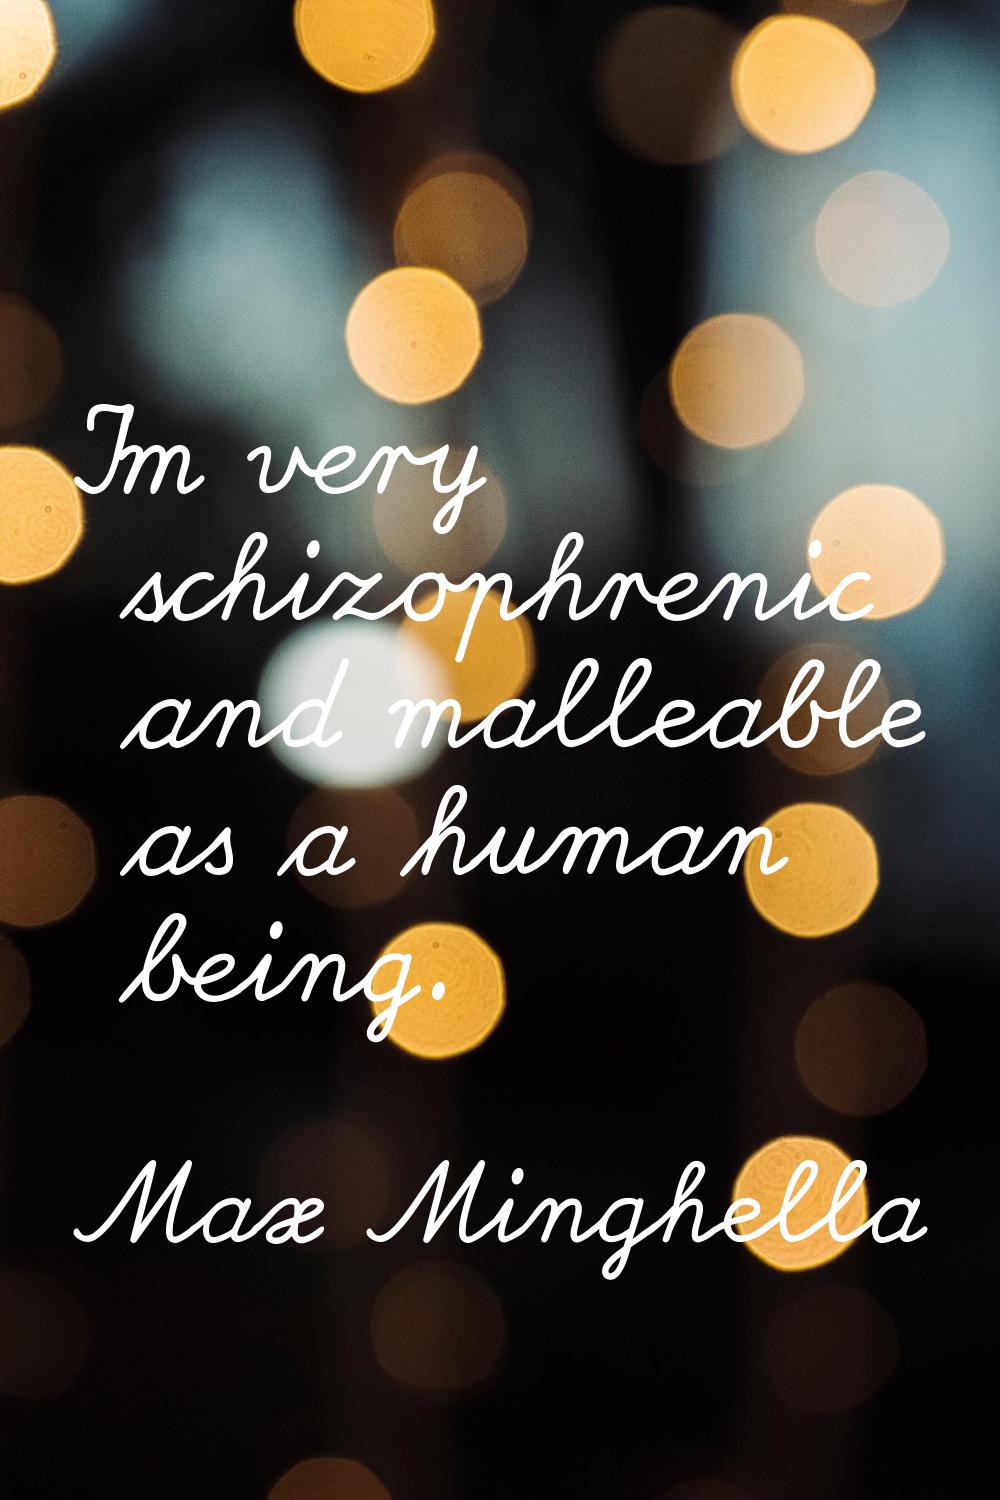 I'm very schizophrenic and malleable as a human being.